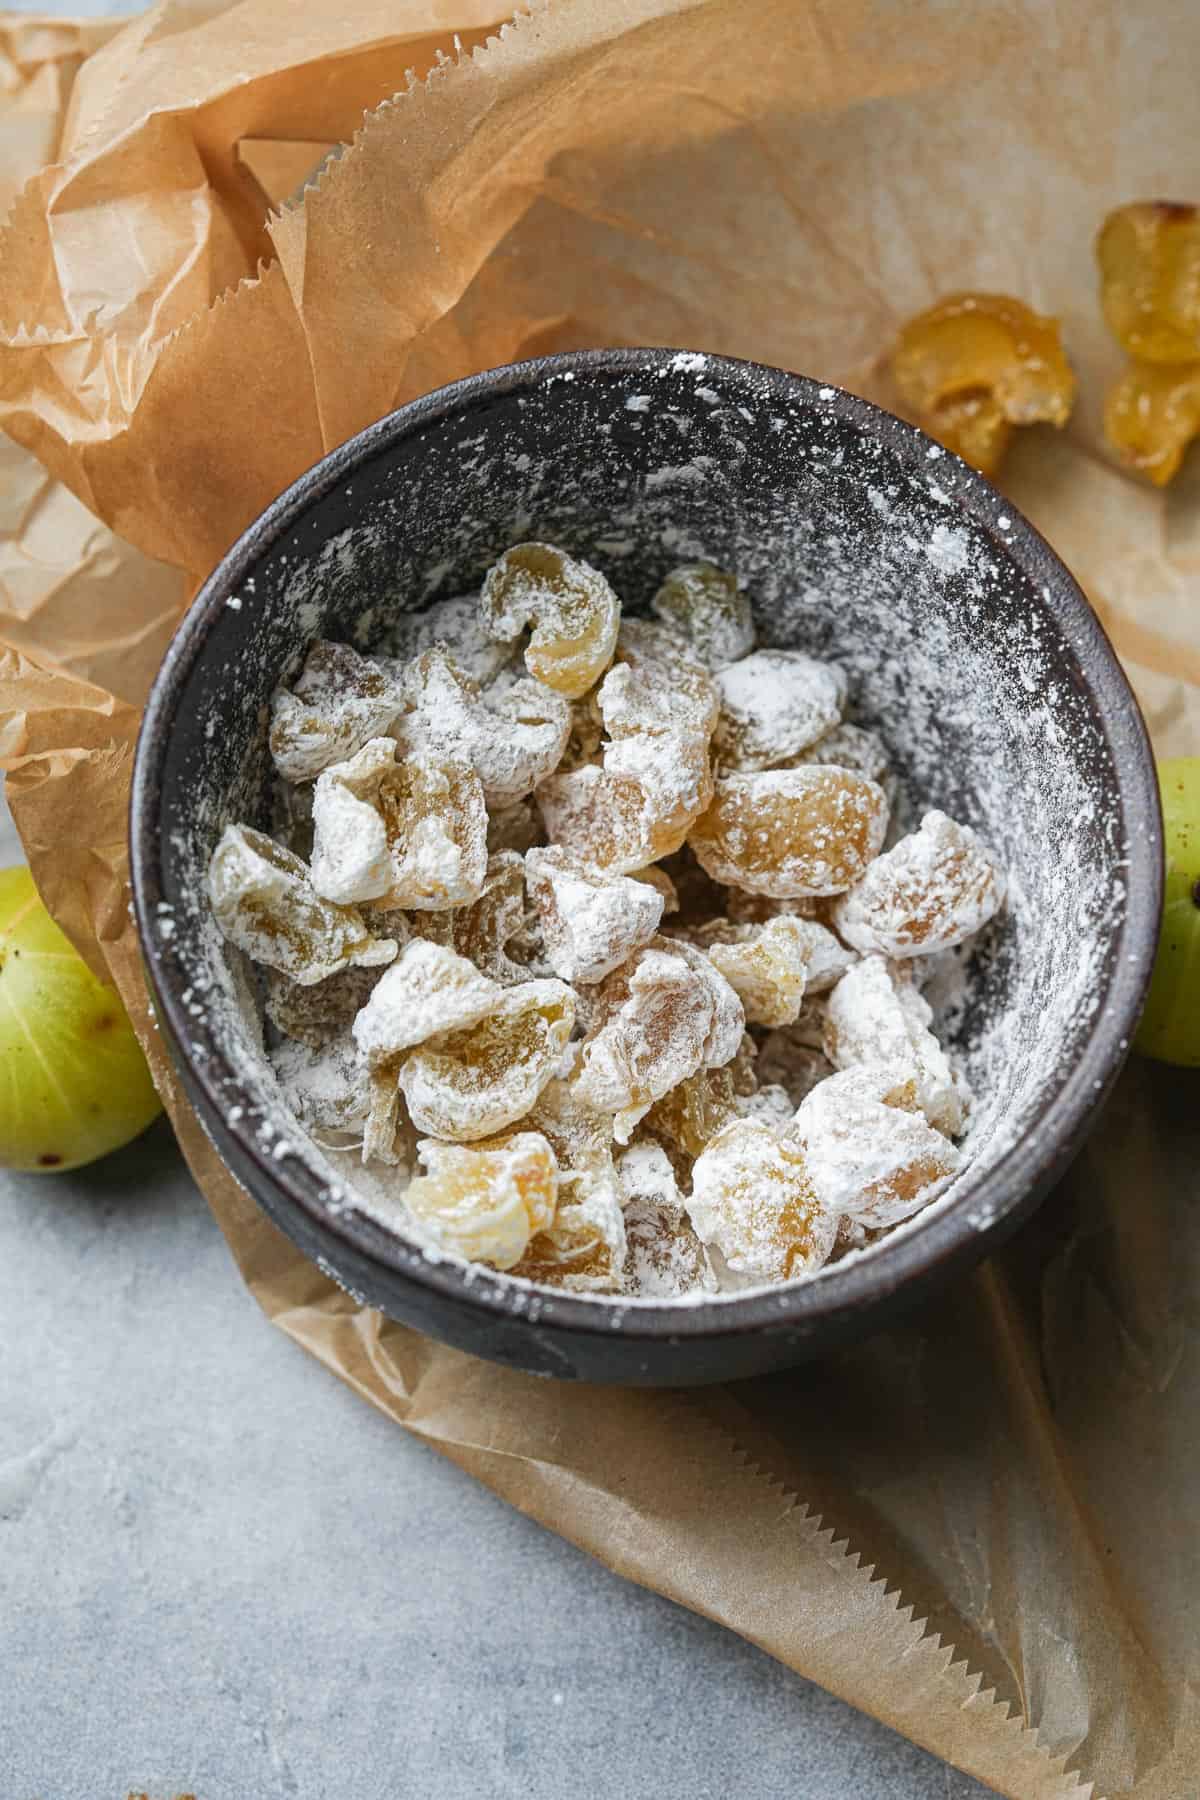 Candied amla coated in powdered sugar in a bowl.